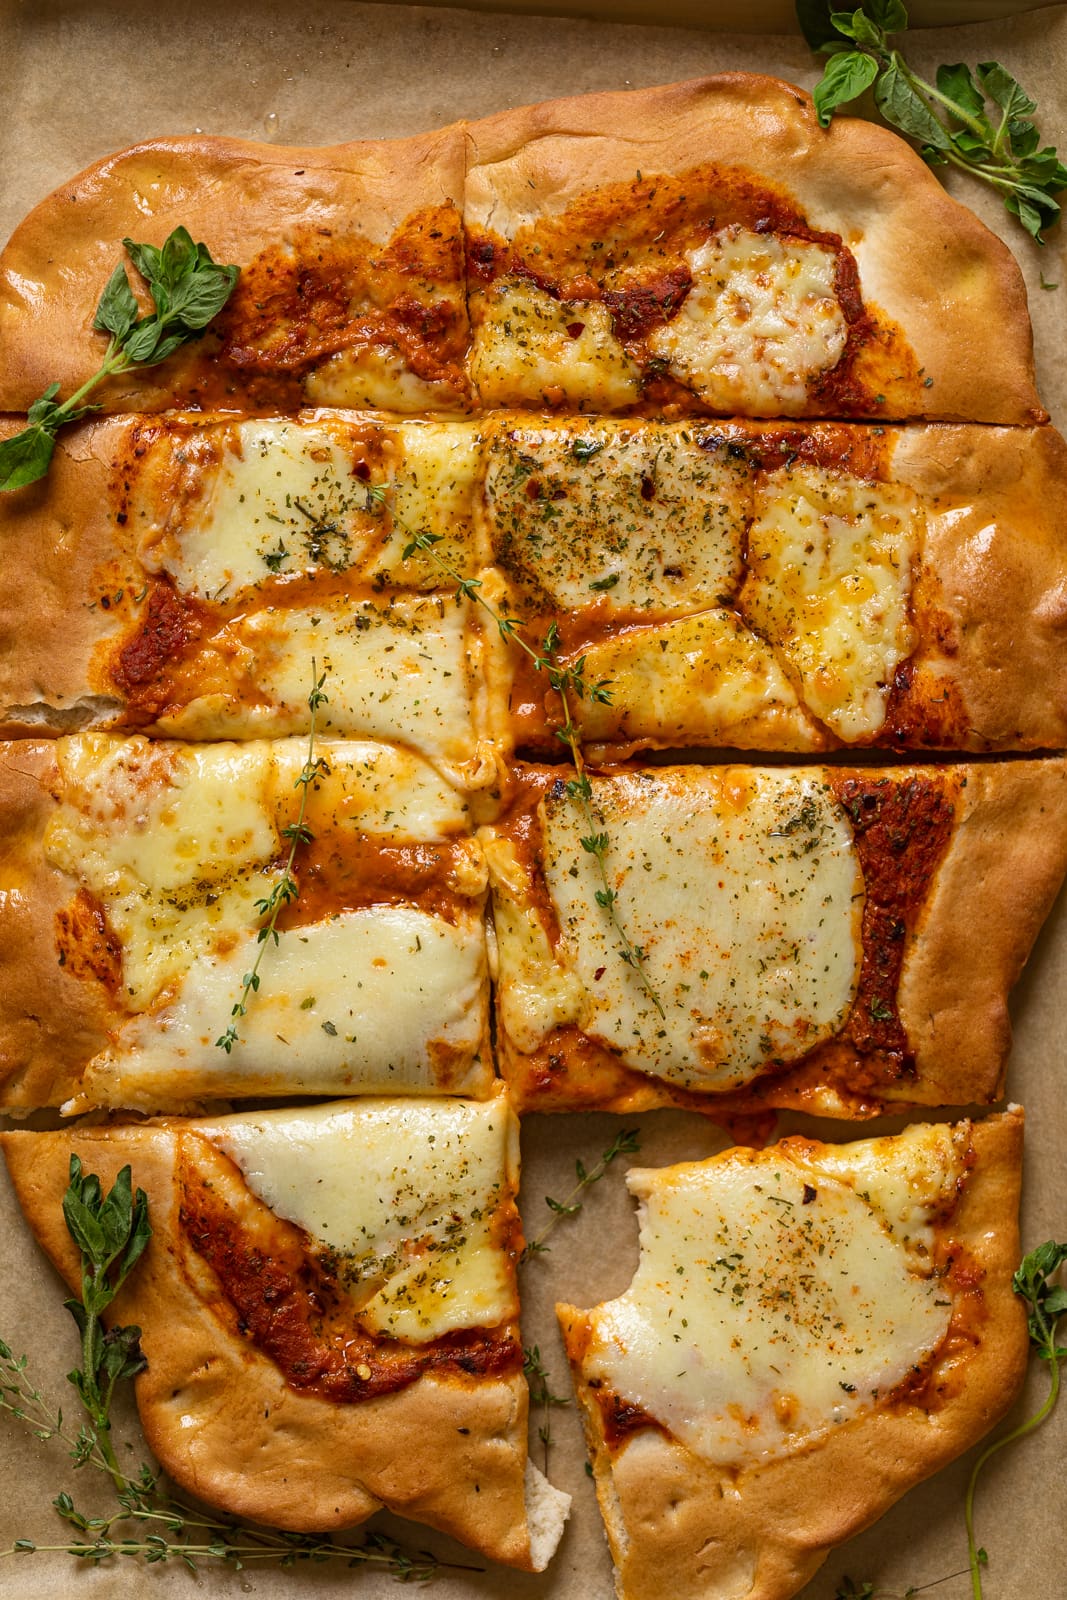 https://www.orchidsandsweettea.com/wp-content/uploads/2022/08/Cheese-Pizza-5-of-9.jpg